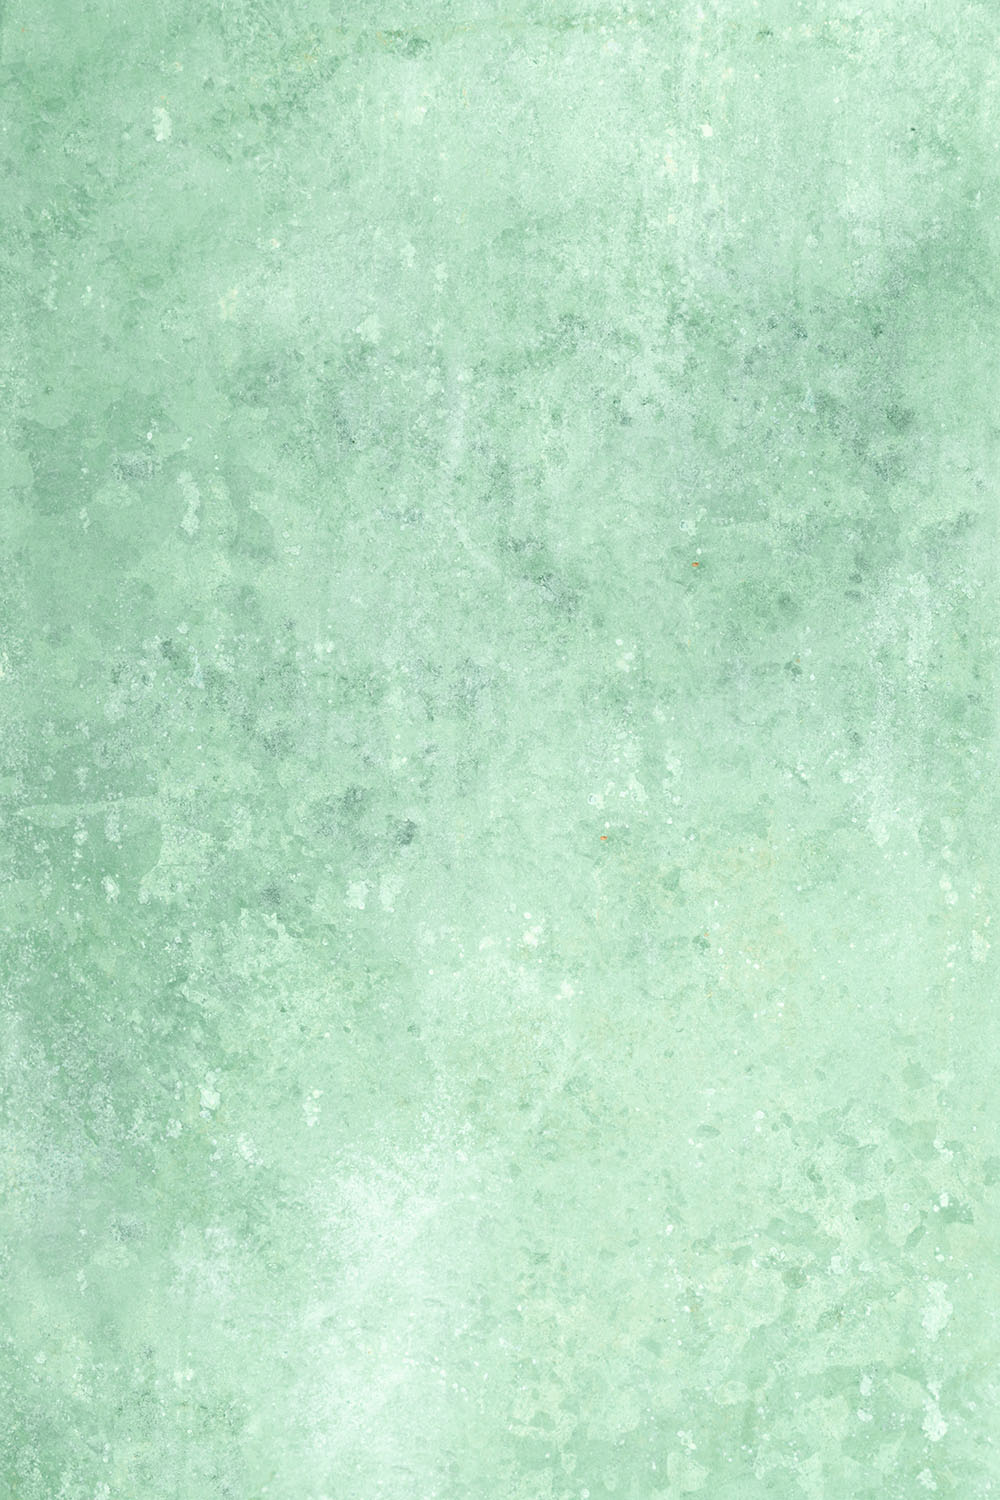 Mint vinyl backdrop ‘tropical ocean’ with soft textures for photography